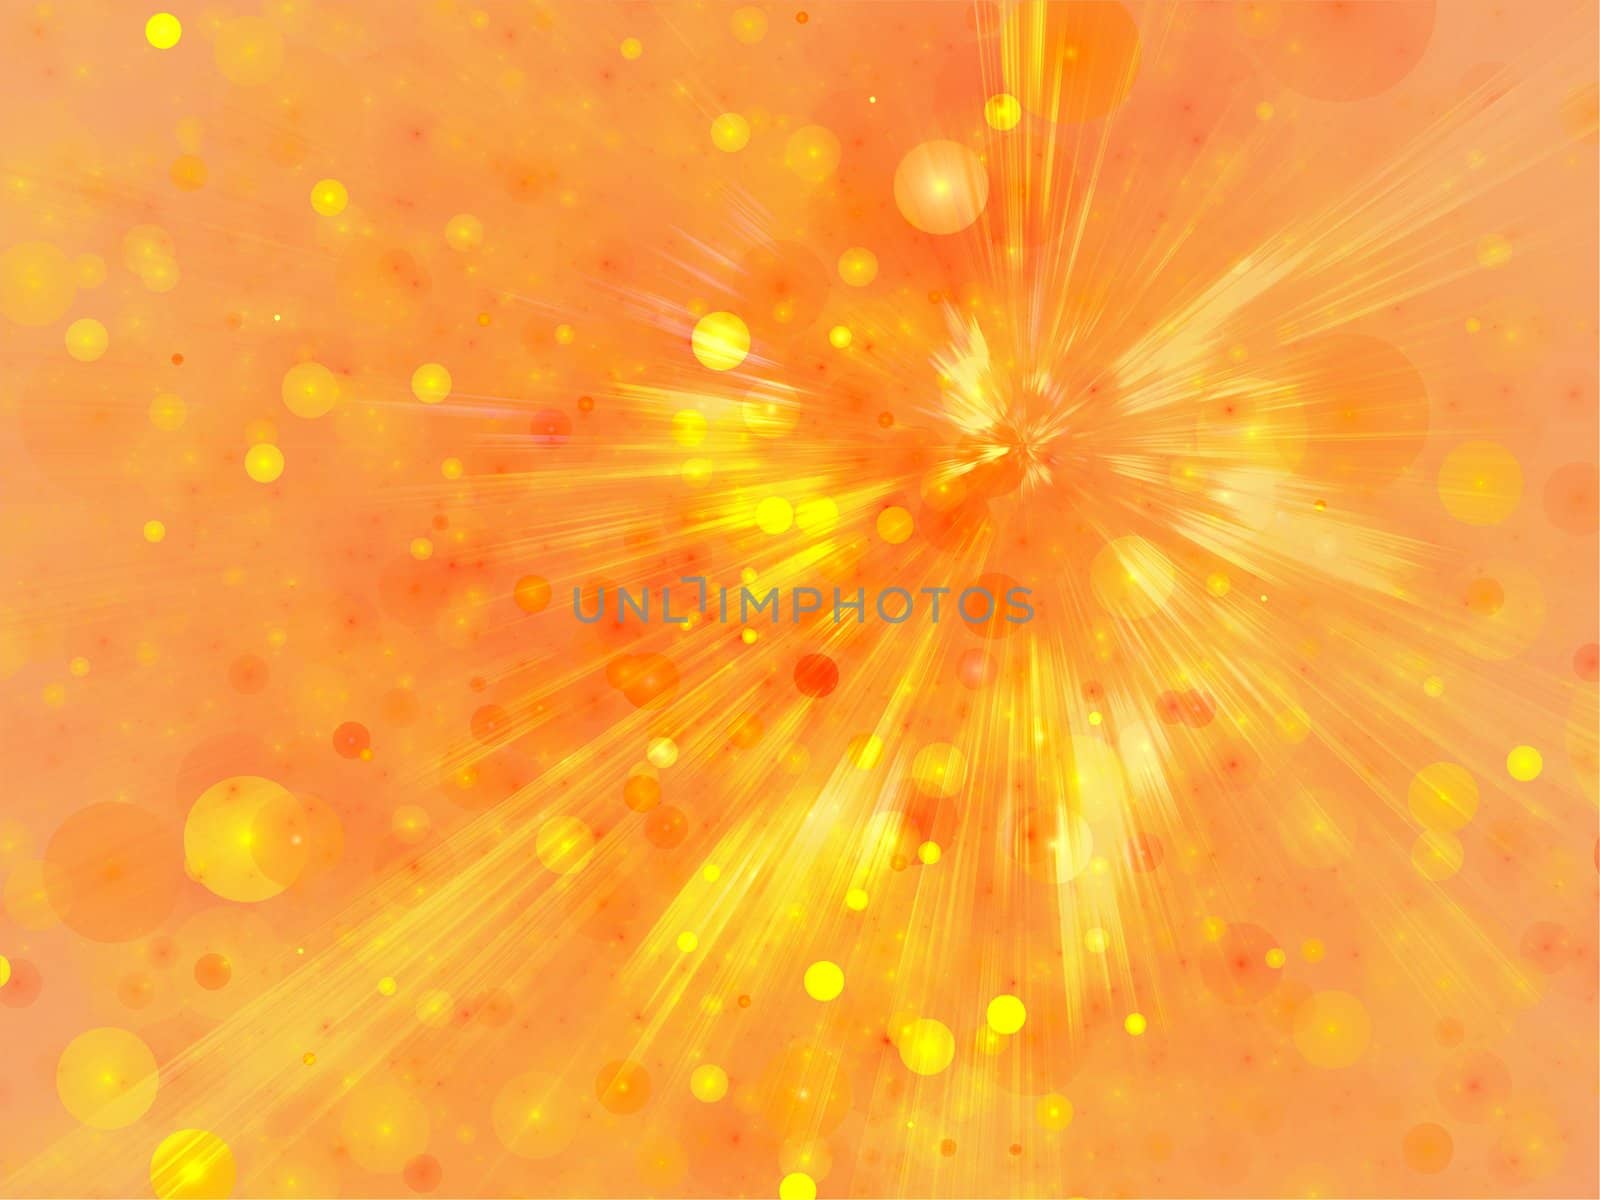  Illustration of energy coming out as explosion from a point resulting in vivid emerging rays 